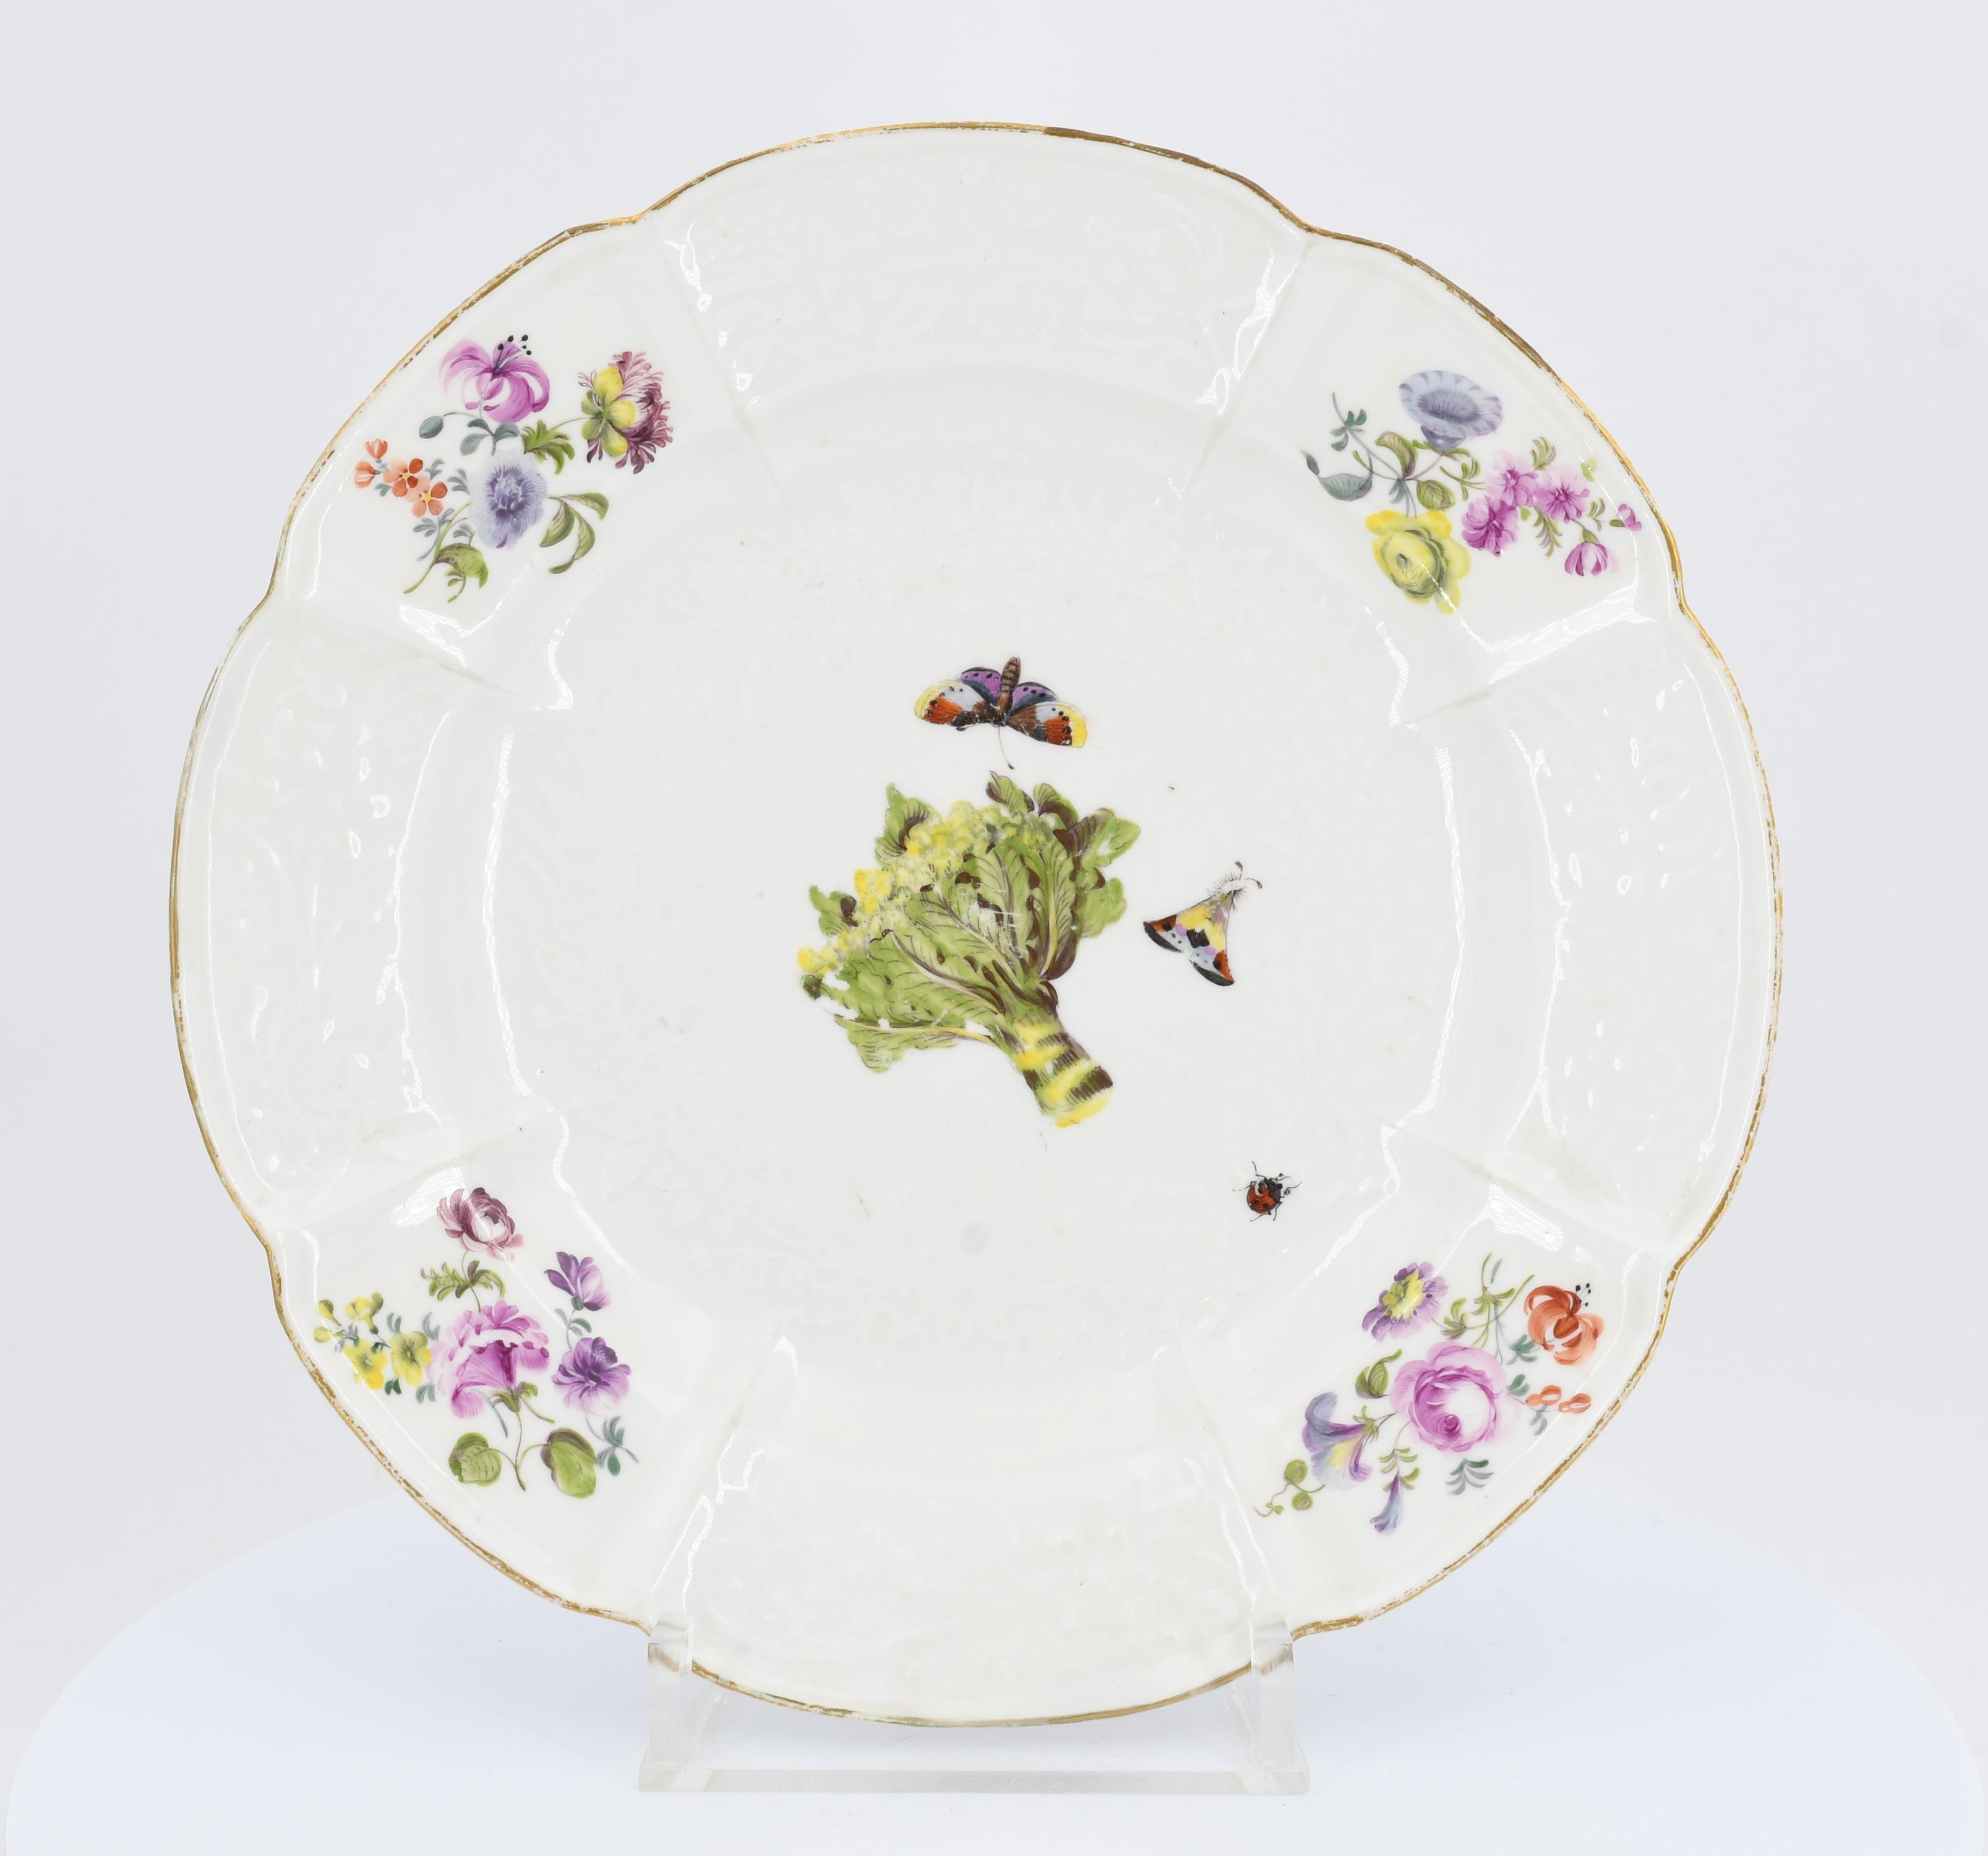 Plate with cauliflower - Image 2 of 3